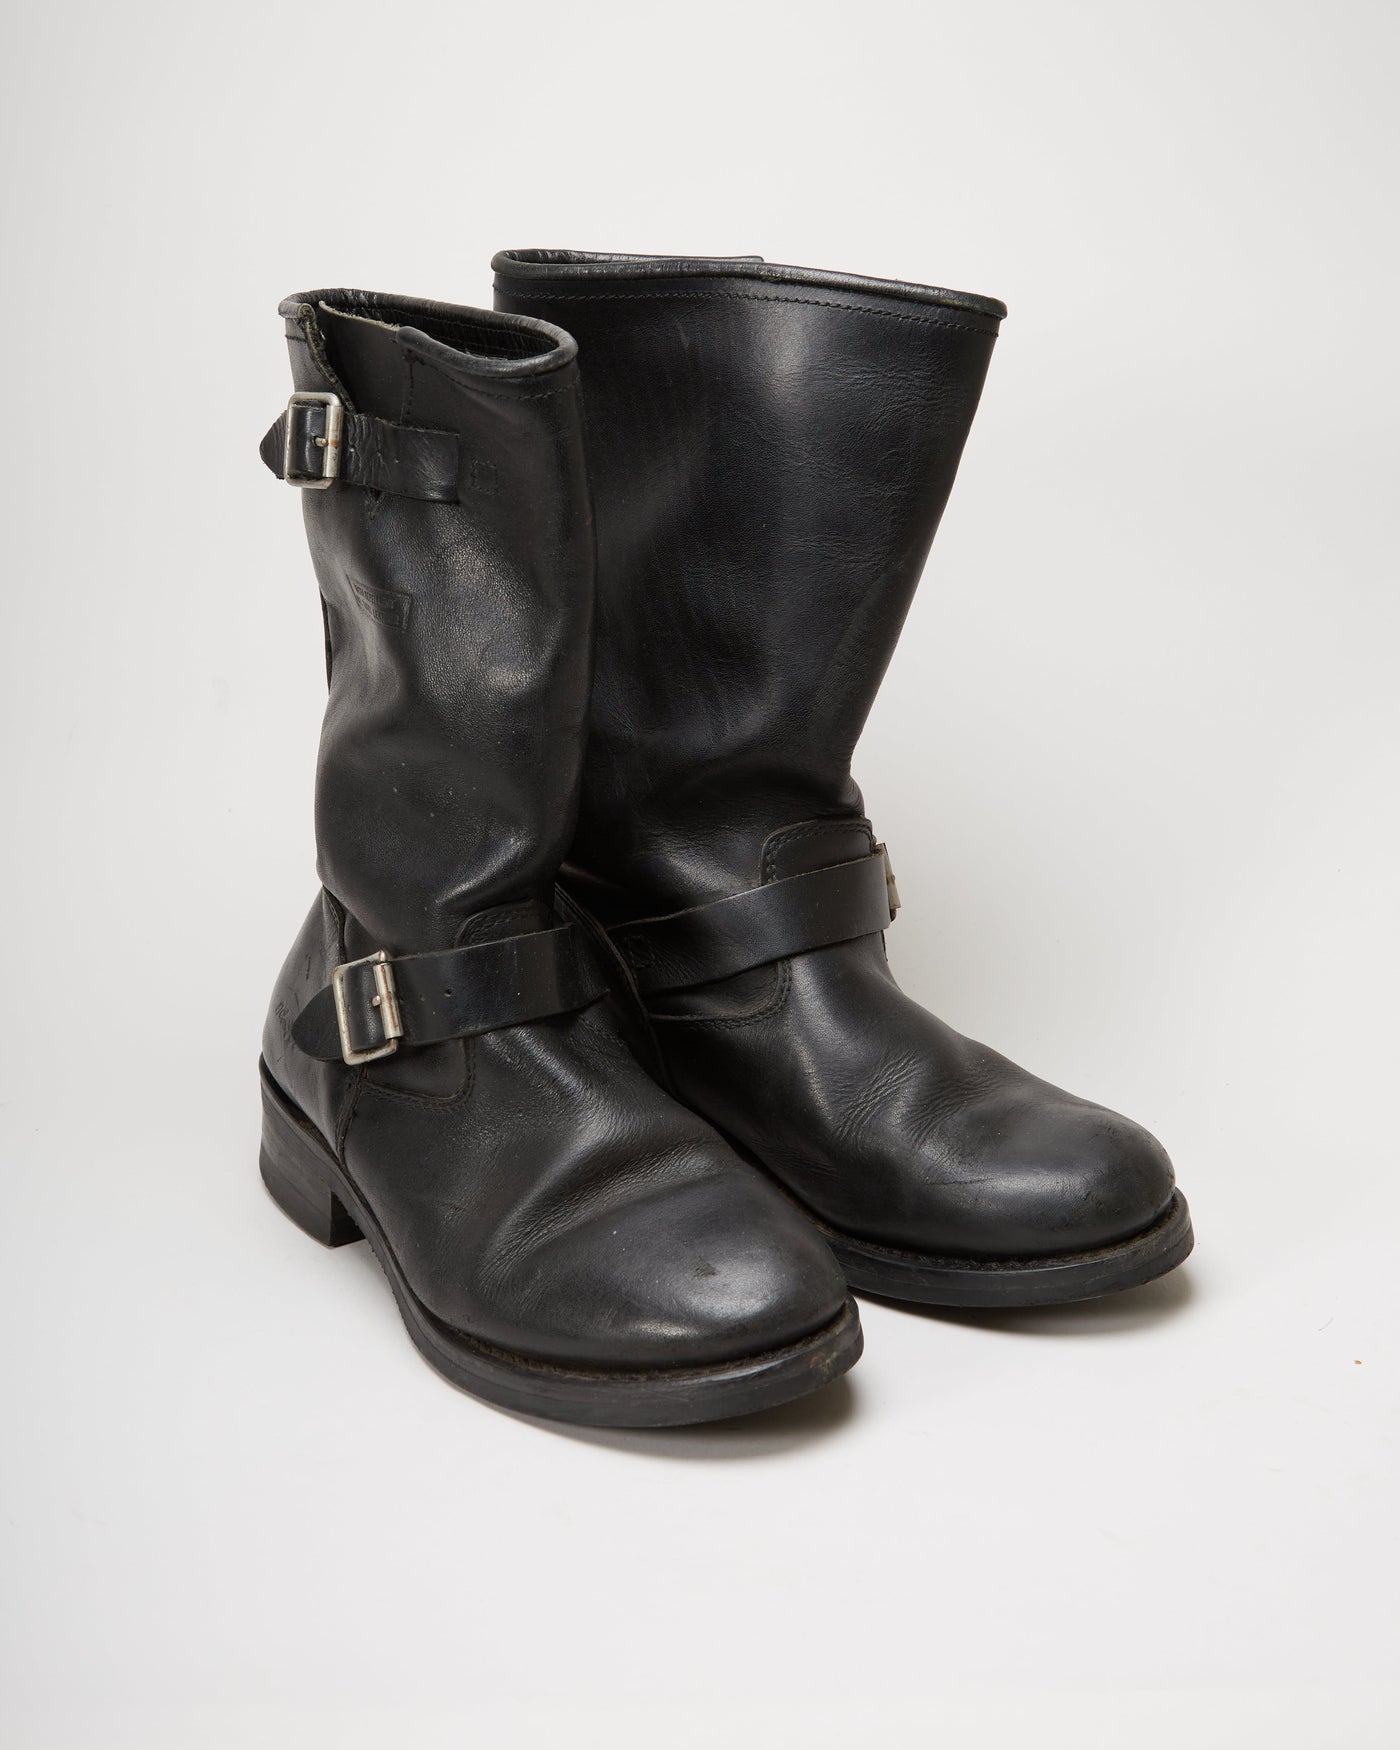 90s Black Leather Boots - UK 9.5